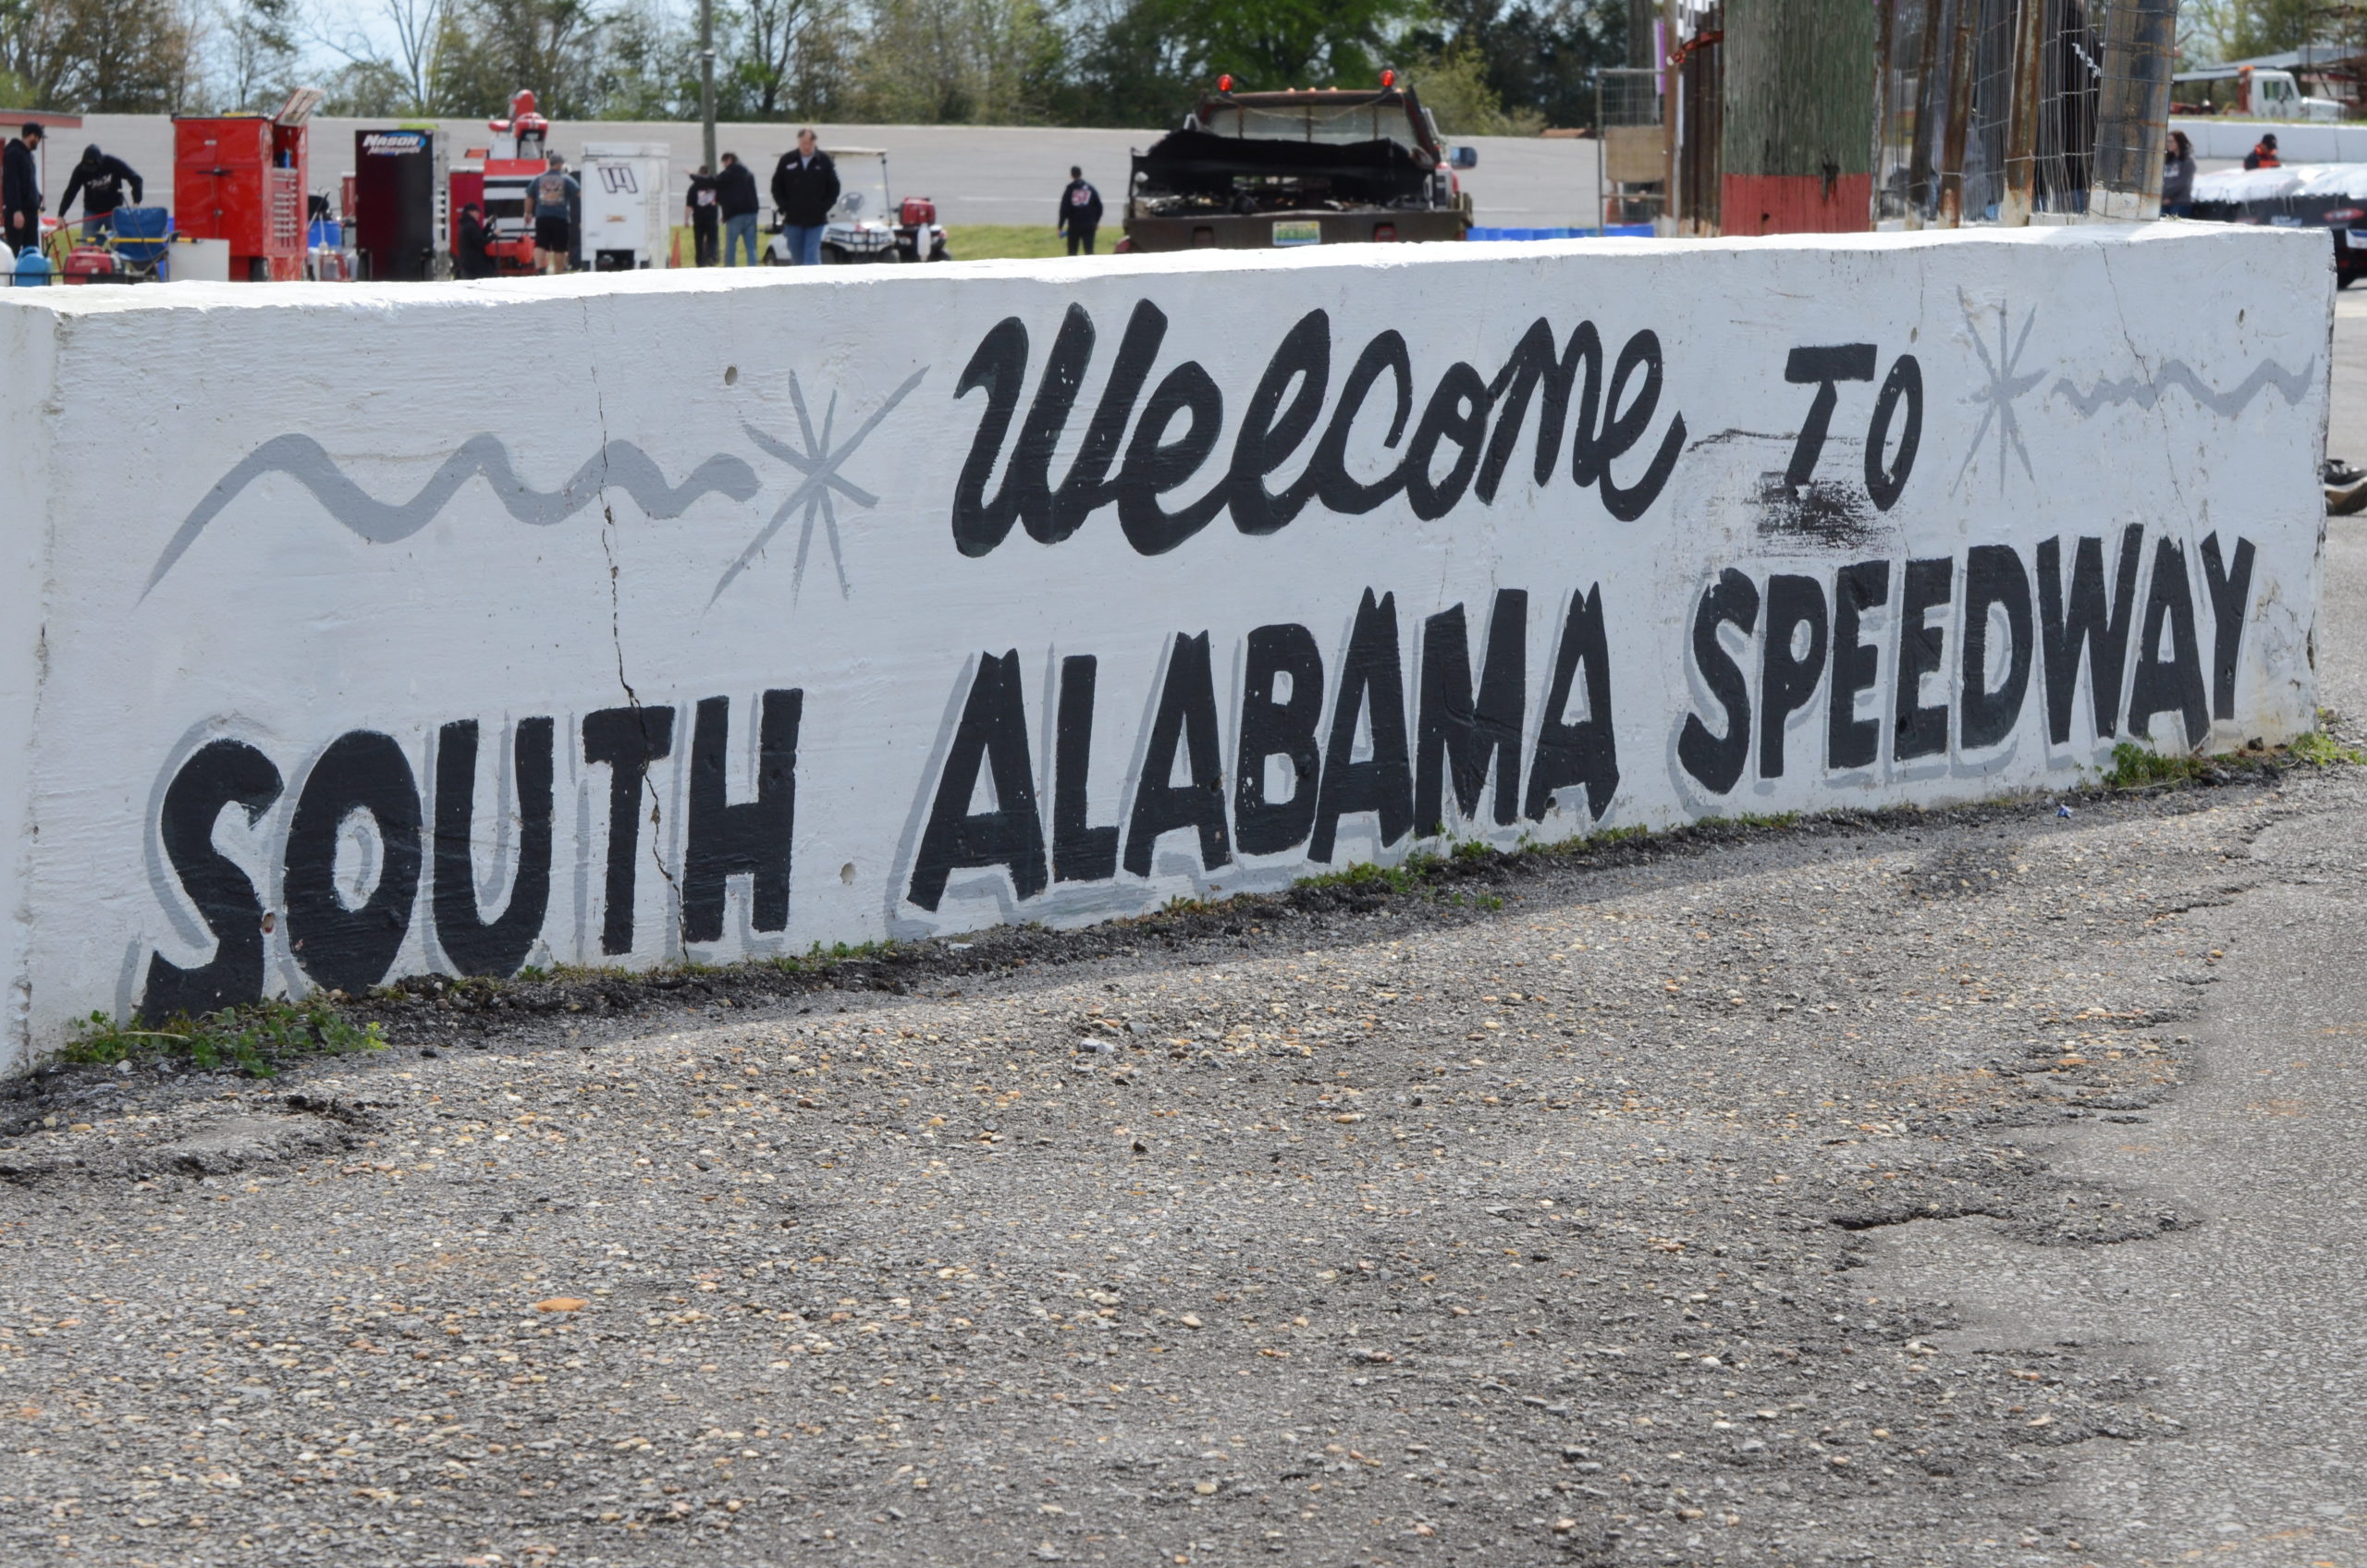 PixelatedSPEED to Cover the Rattler 250 as Racing Returns to South Alabama & the 2020 Southern Super Series Begins Following Two Month Delay